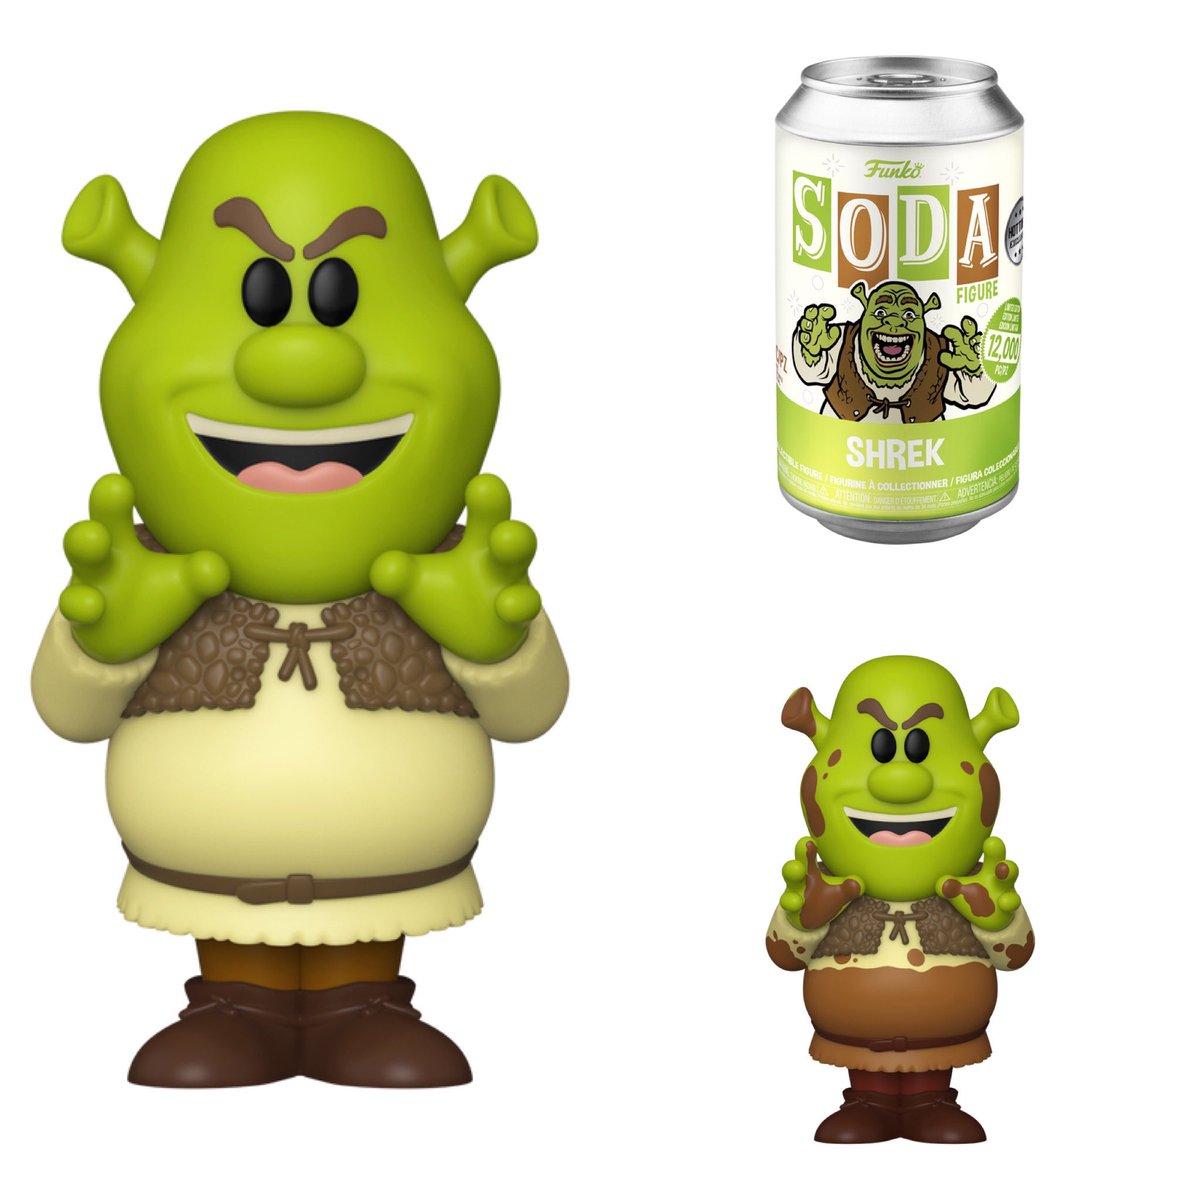 Available Now: Hot Topic Exclusive Funko Vinyl SODA Shrek with Chase (Styles May Vary) Link: finderz.info/3yApIoY #Ad #Shrek #Funko #FunkoSODA #FunkoSODAs #FunkoVinylSODA #SODA #VinylSODA #FunkoCollector #Collectible #Collectibles #Toy #Toys #FunkoFinderz